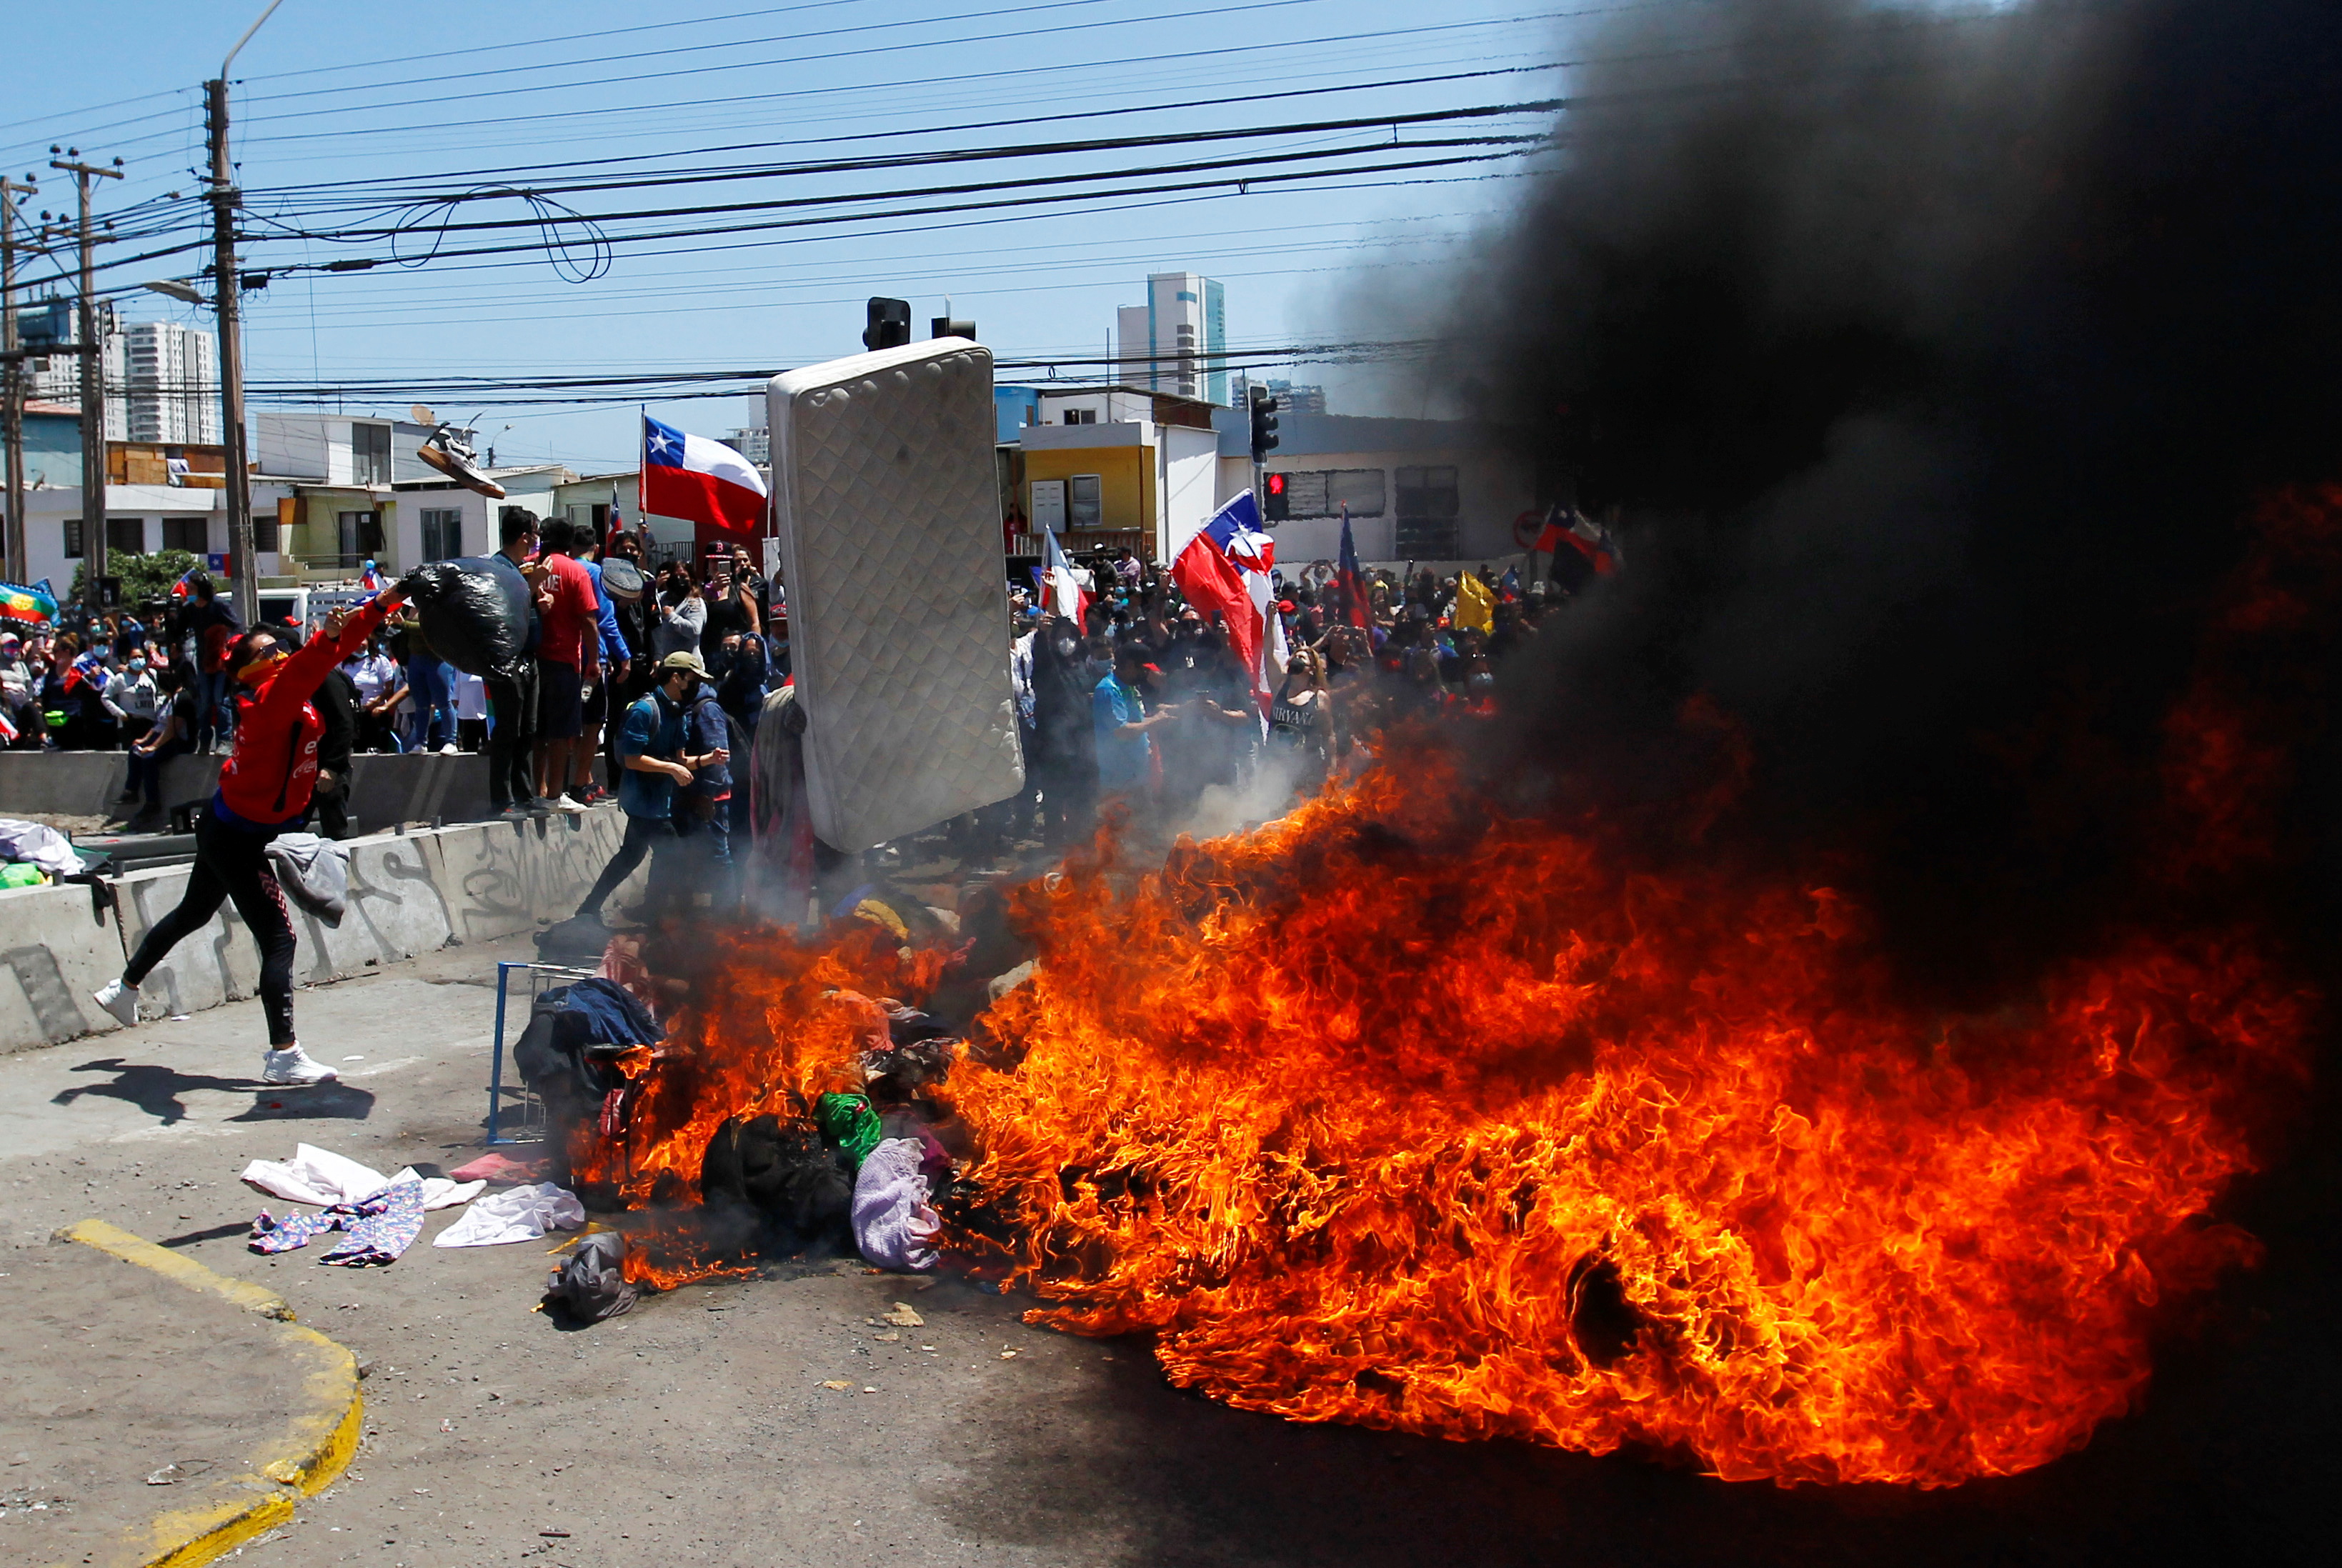 Demonstrators burn the belongings of Venezuelan migrants at a makeshift camp in a public square during a rally against the migration in Iquique, Chile, September 25, 2021. REUTERS/Alex Diaz 